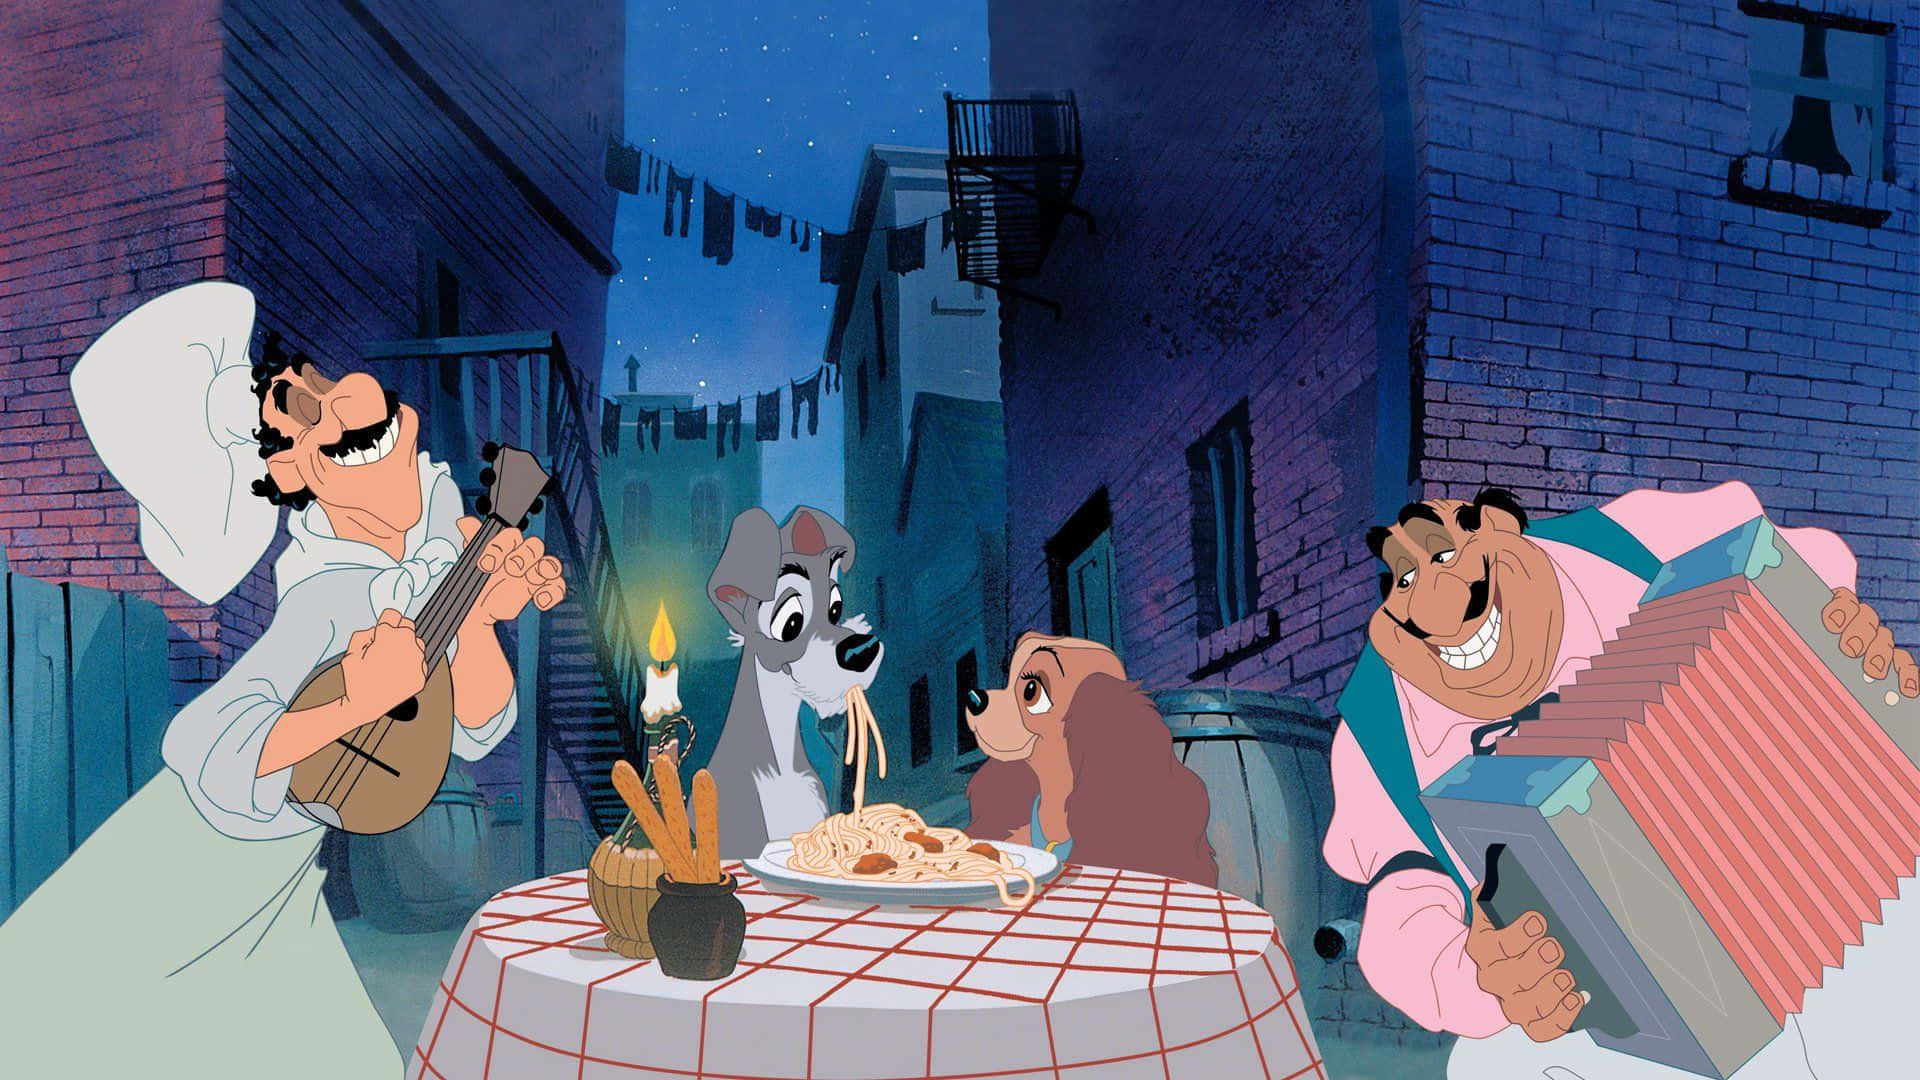 Lady And The Tramp's Iconic Spaghetti Scene Background